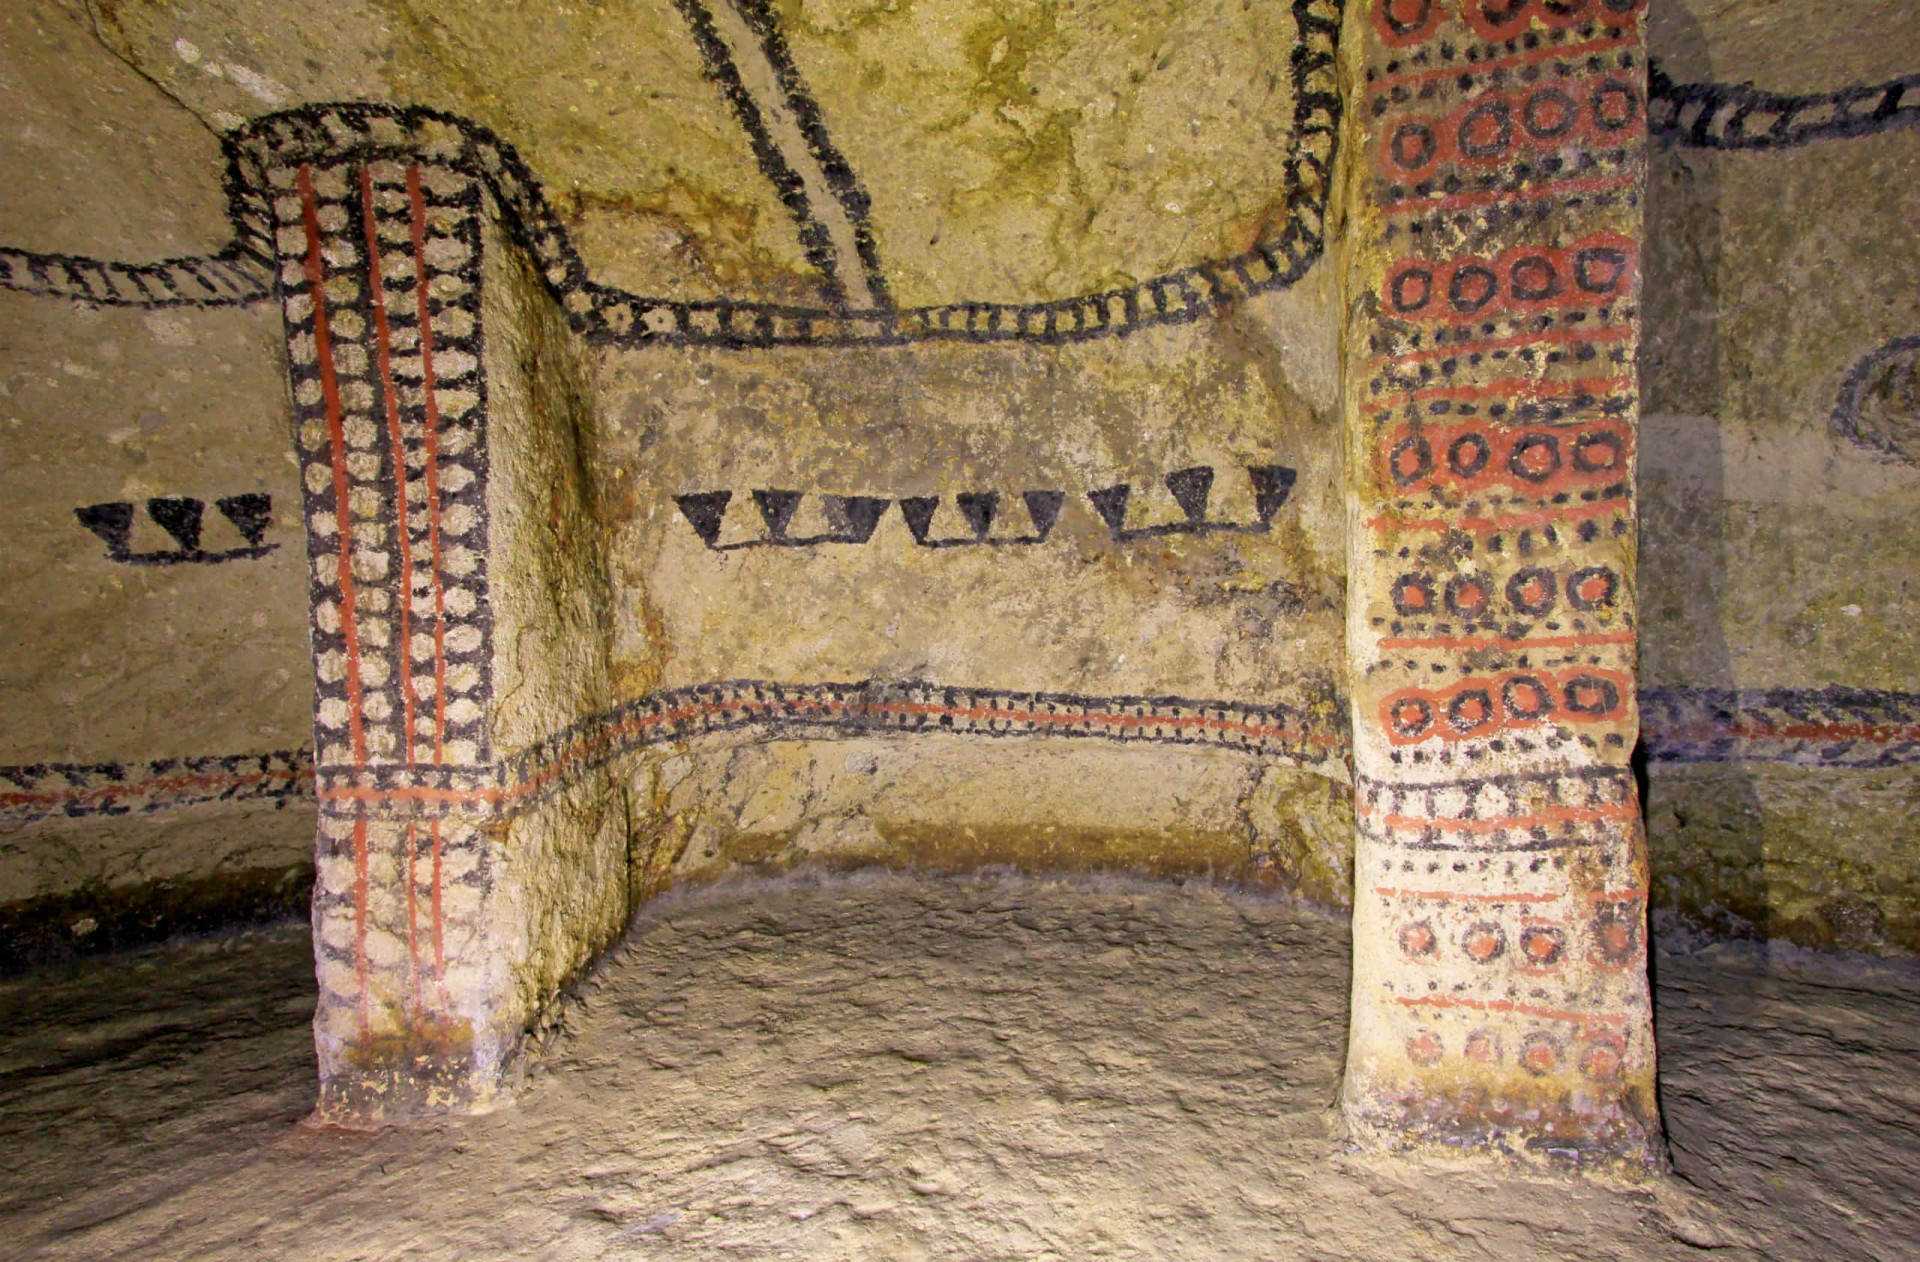 Location: Inza, Cauca Department<br>Criteria: Cultural<br>Year established: 1995<br>Description: Several hypogea (underground temples or tombs) distinguish this site. They were created by the Tierradentro, one of the pre-Columbian cultures of Colombia, and most date from between the 6th and 9th centuries CE.<p><a href="https://www.msn.com/en-us/community/channel/vid-7xx8mnucu55yw63we9va2gwr7uihbxwc68fxqp25x6tg4ftibpra?cvid=94631541bc0f4f89bfd59158d696ad7e">Follow us and access great exclusive content every day</a></p>